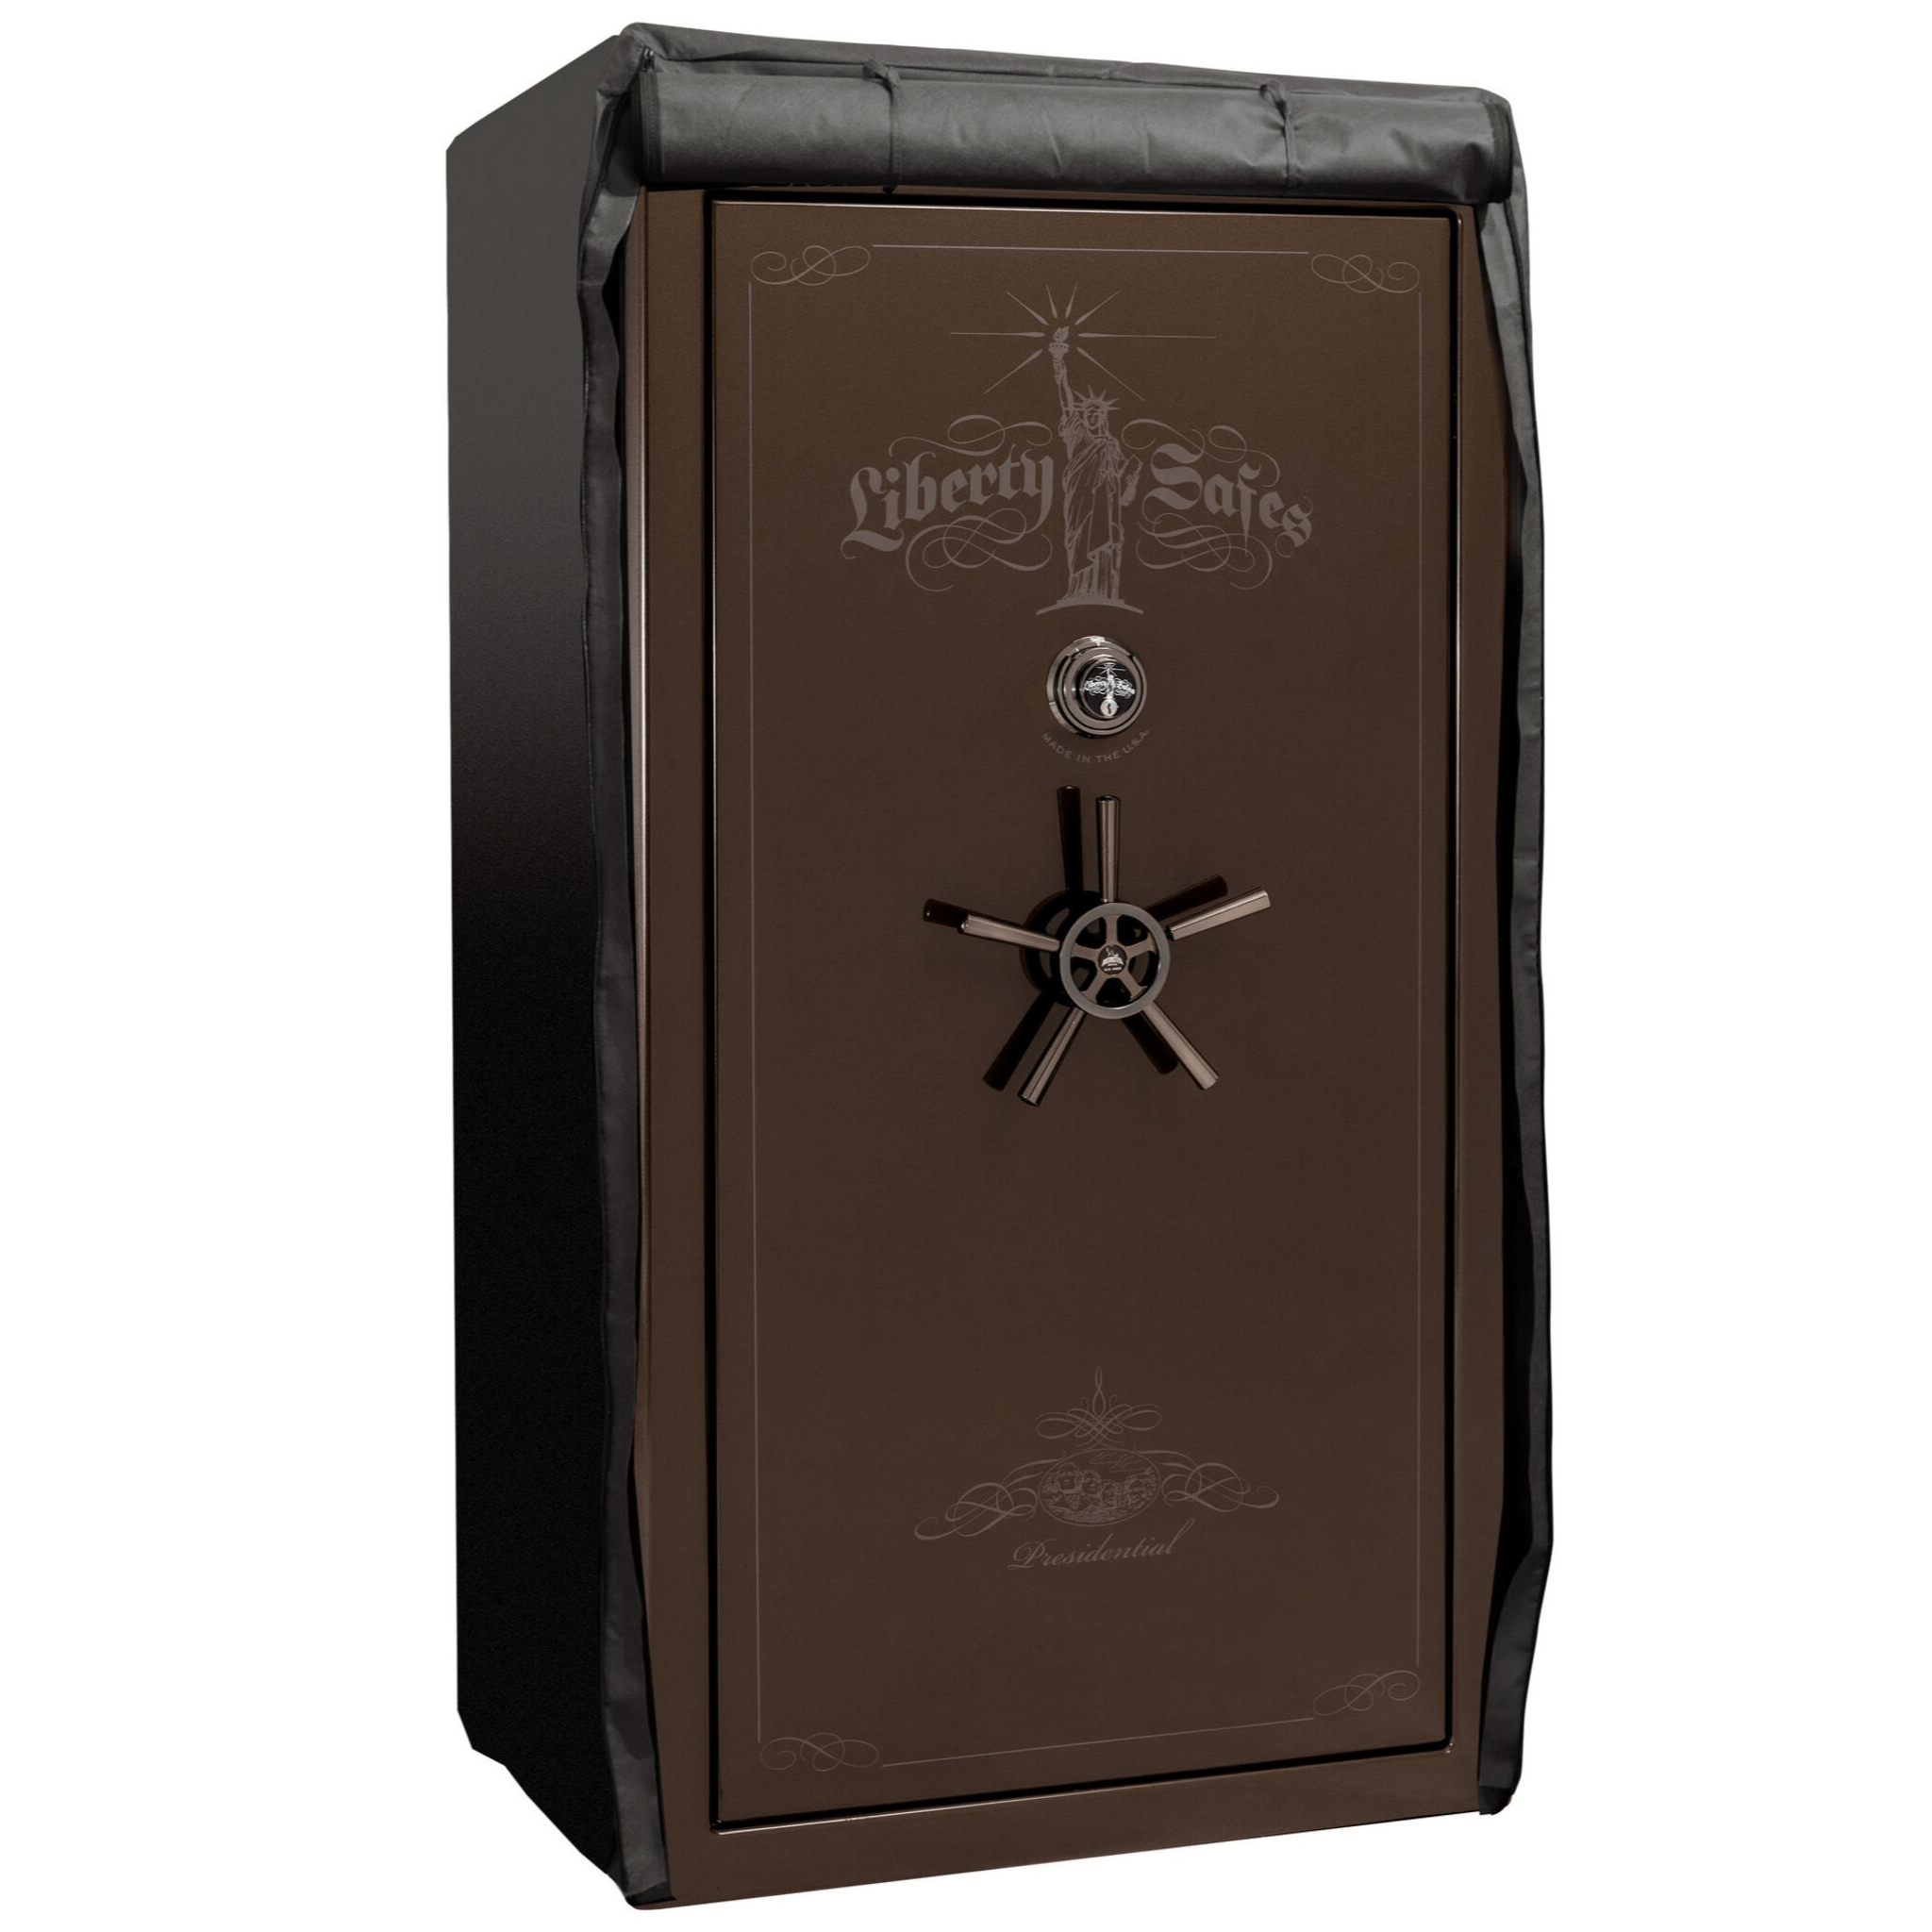 Accessory - Security - Safe Cover - 40 size safes, photo 2